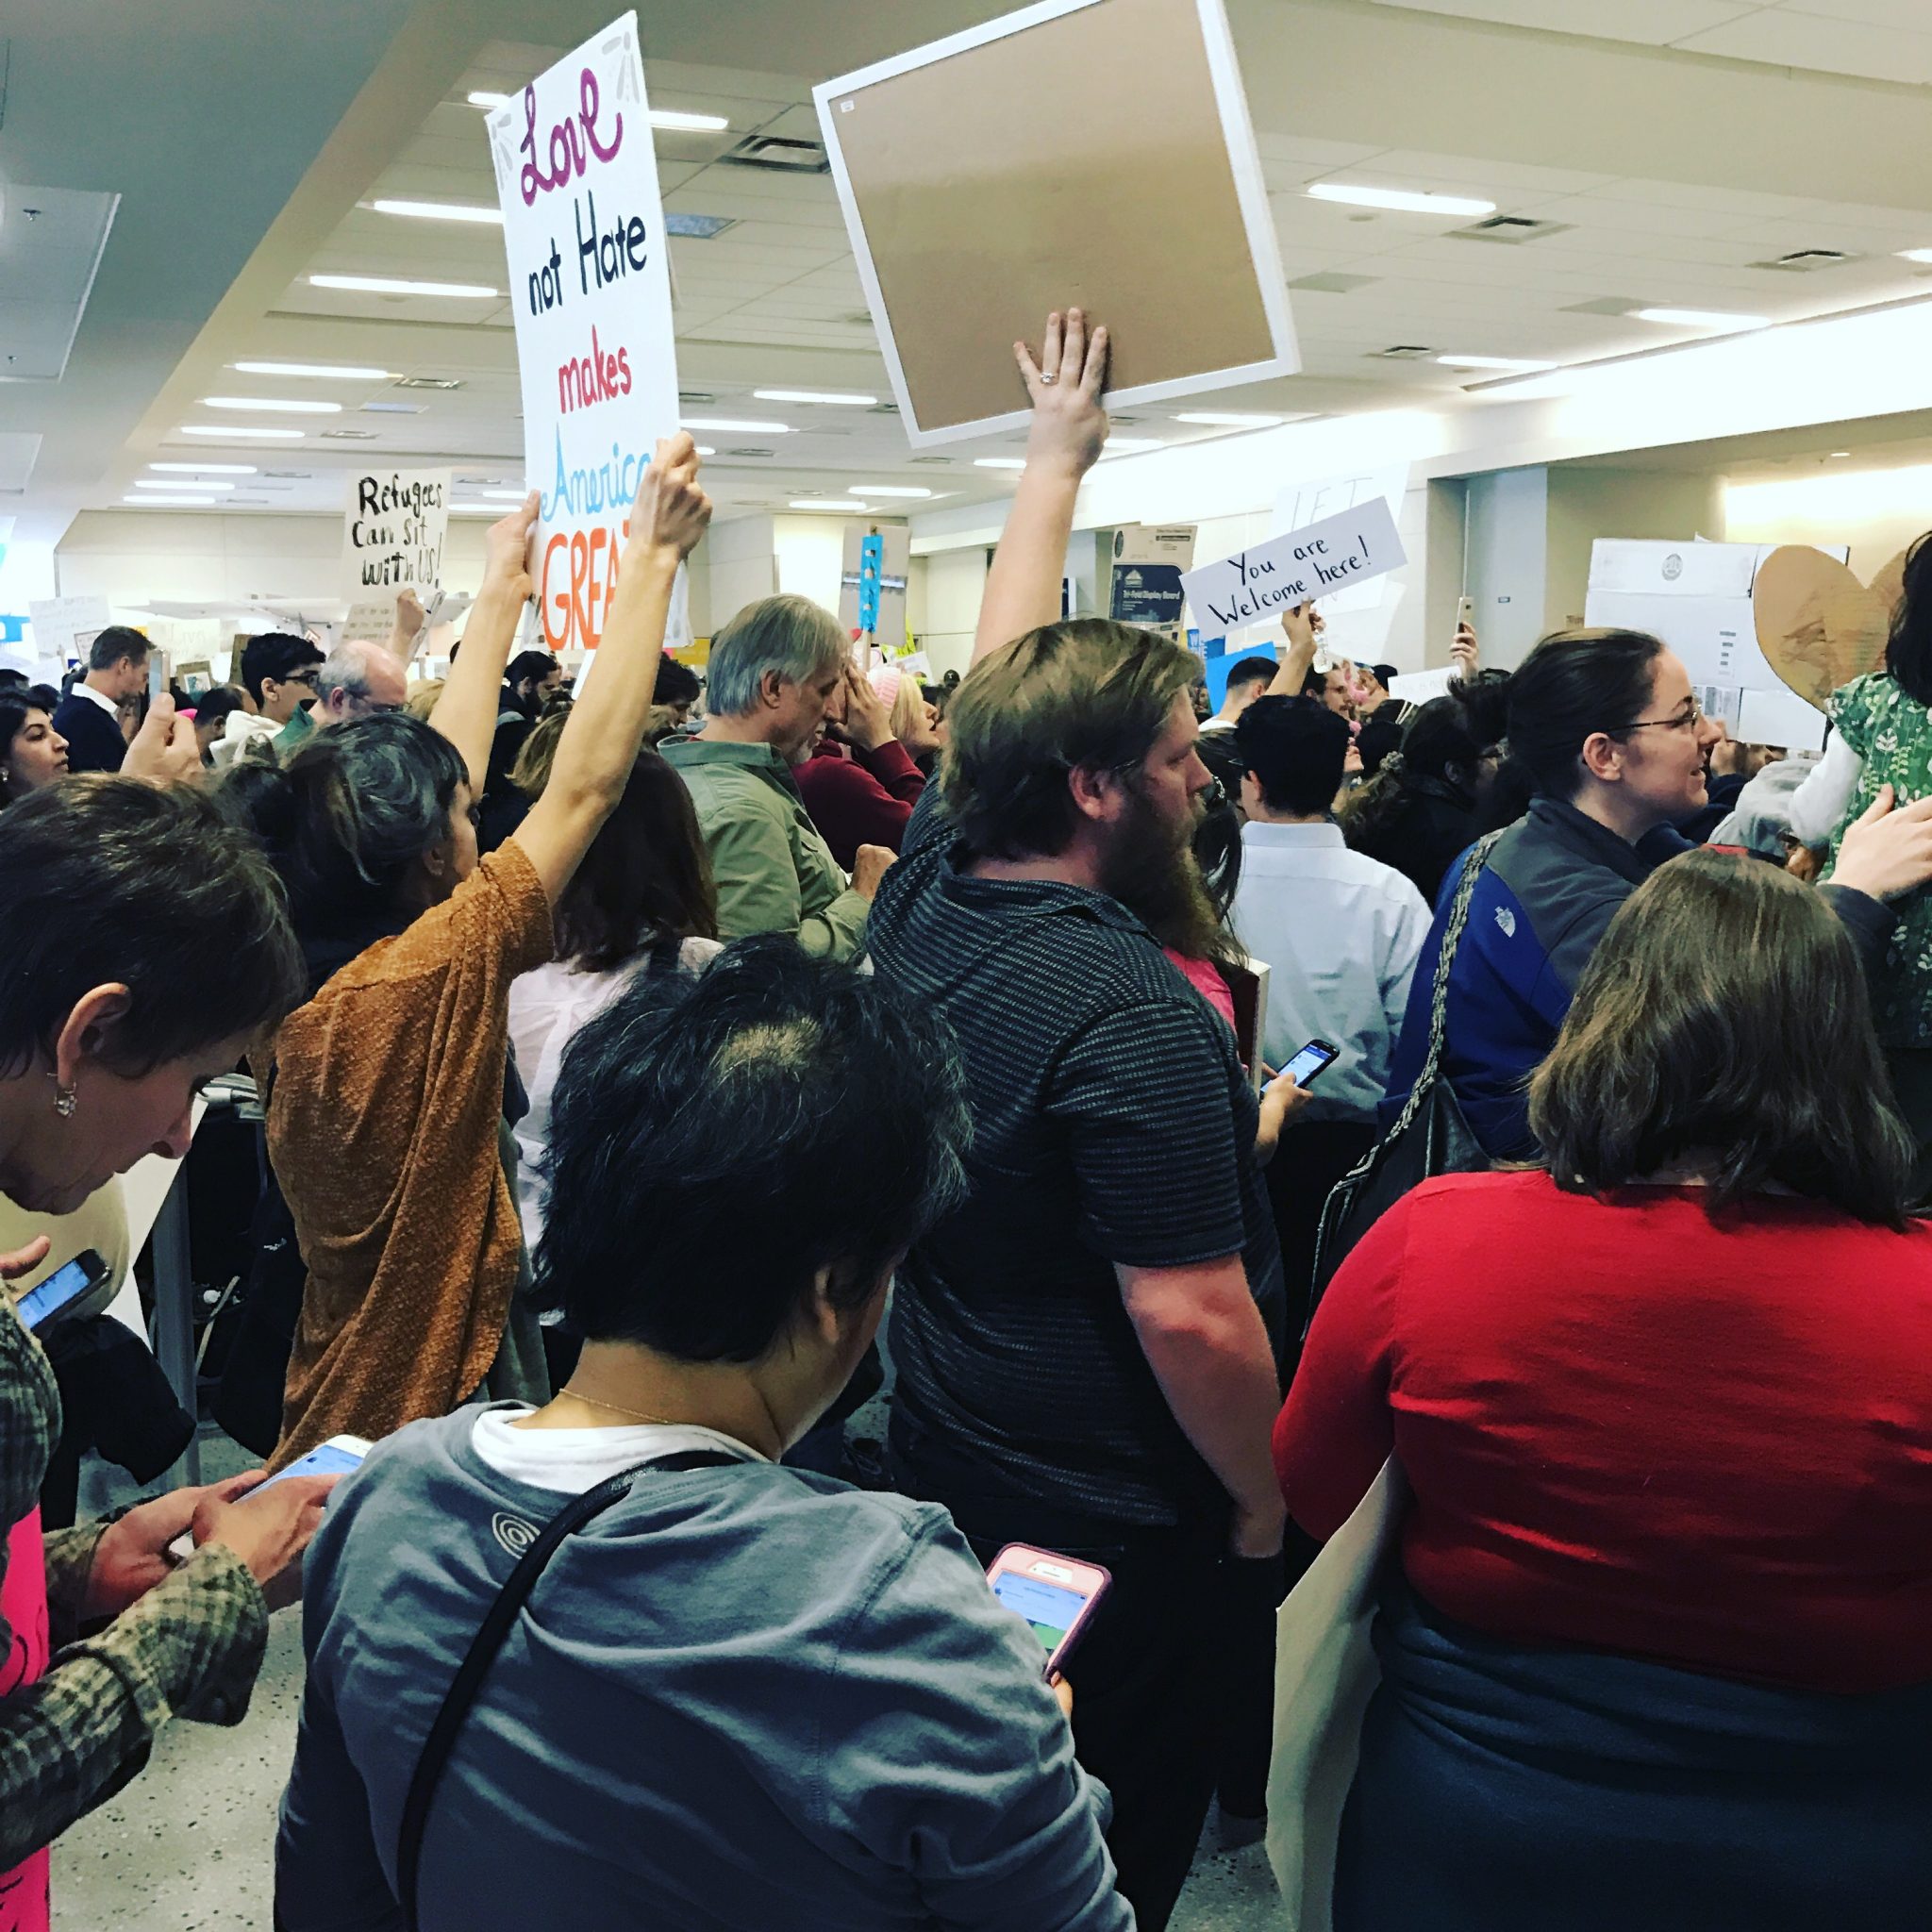 On Sunday, DFW airport was packed with protestors upset about what many are calling a "Muslim ban." (Photo by Michelle Meals)